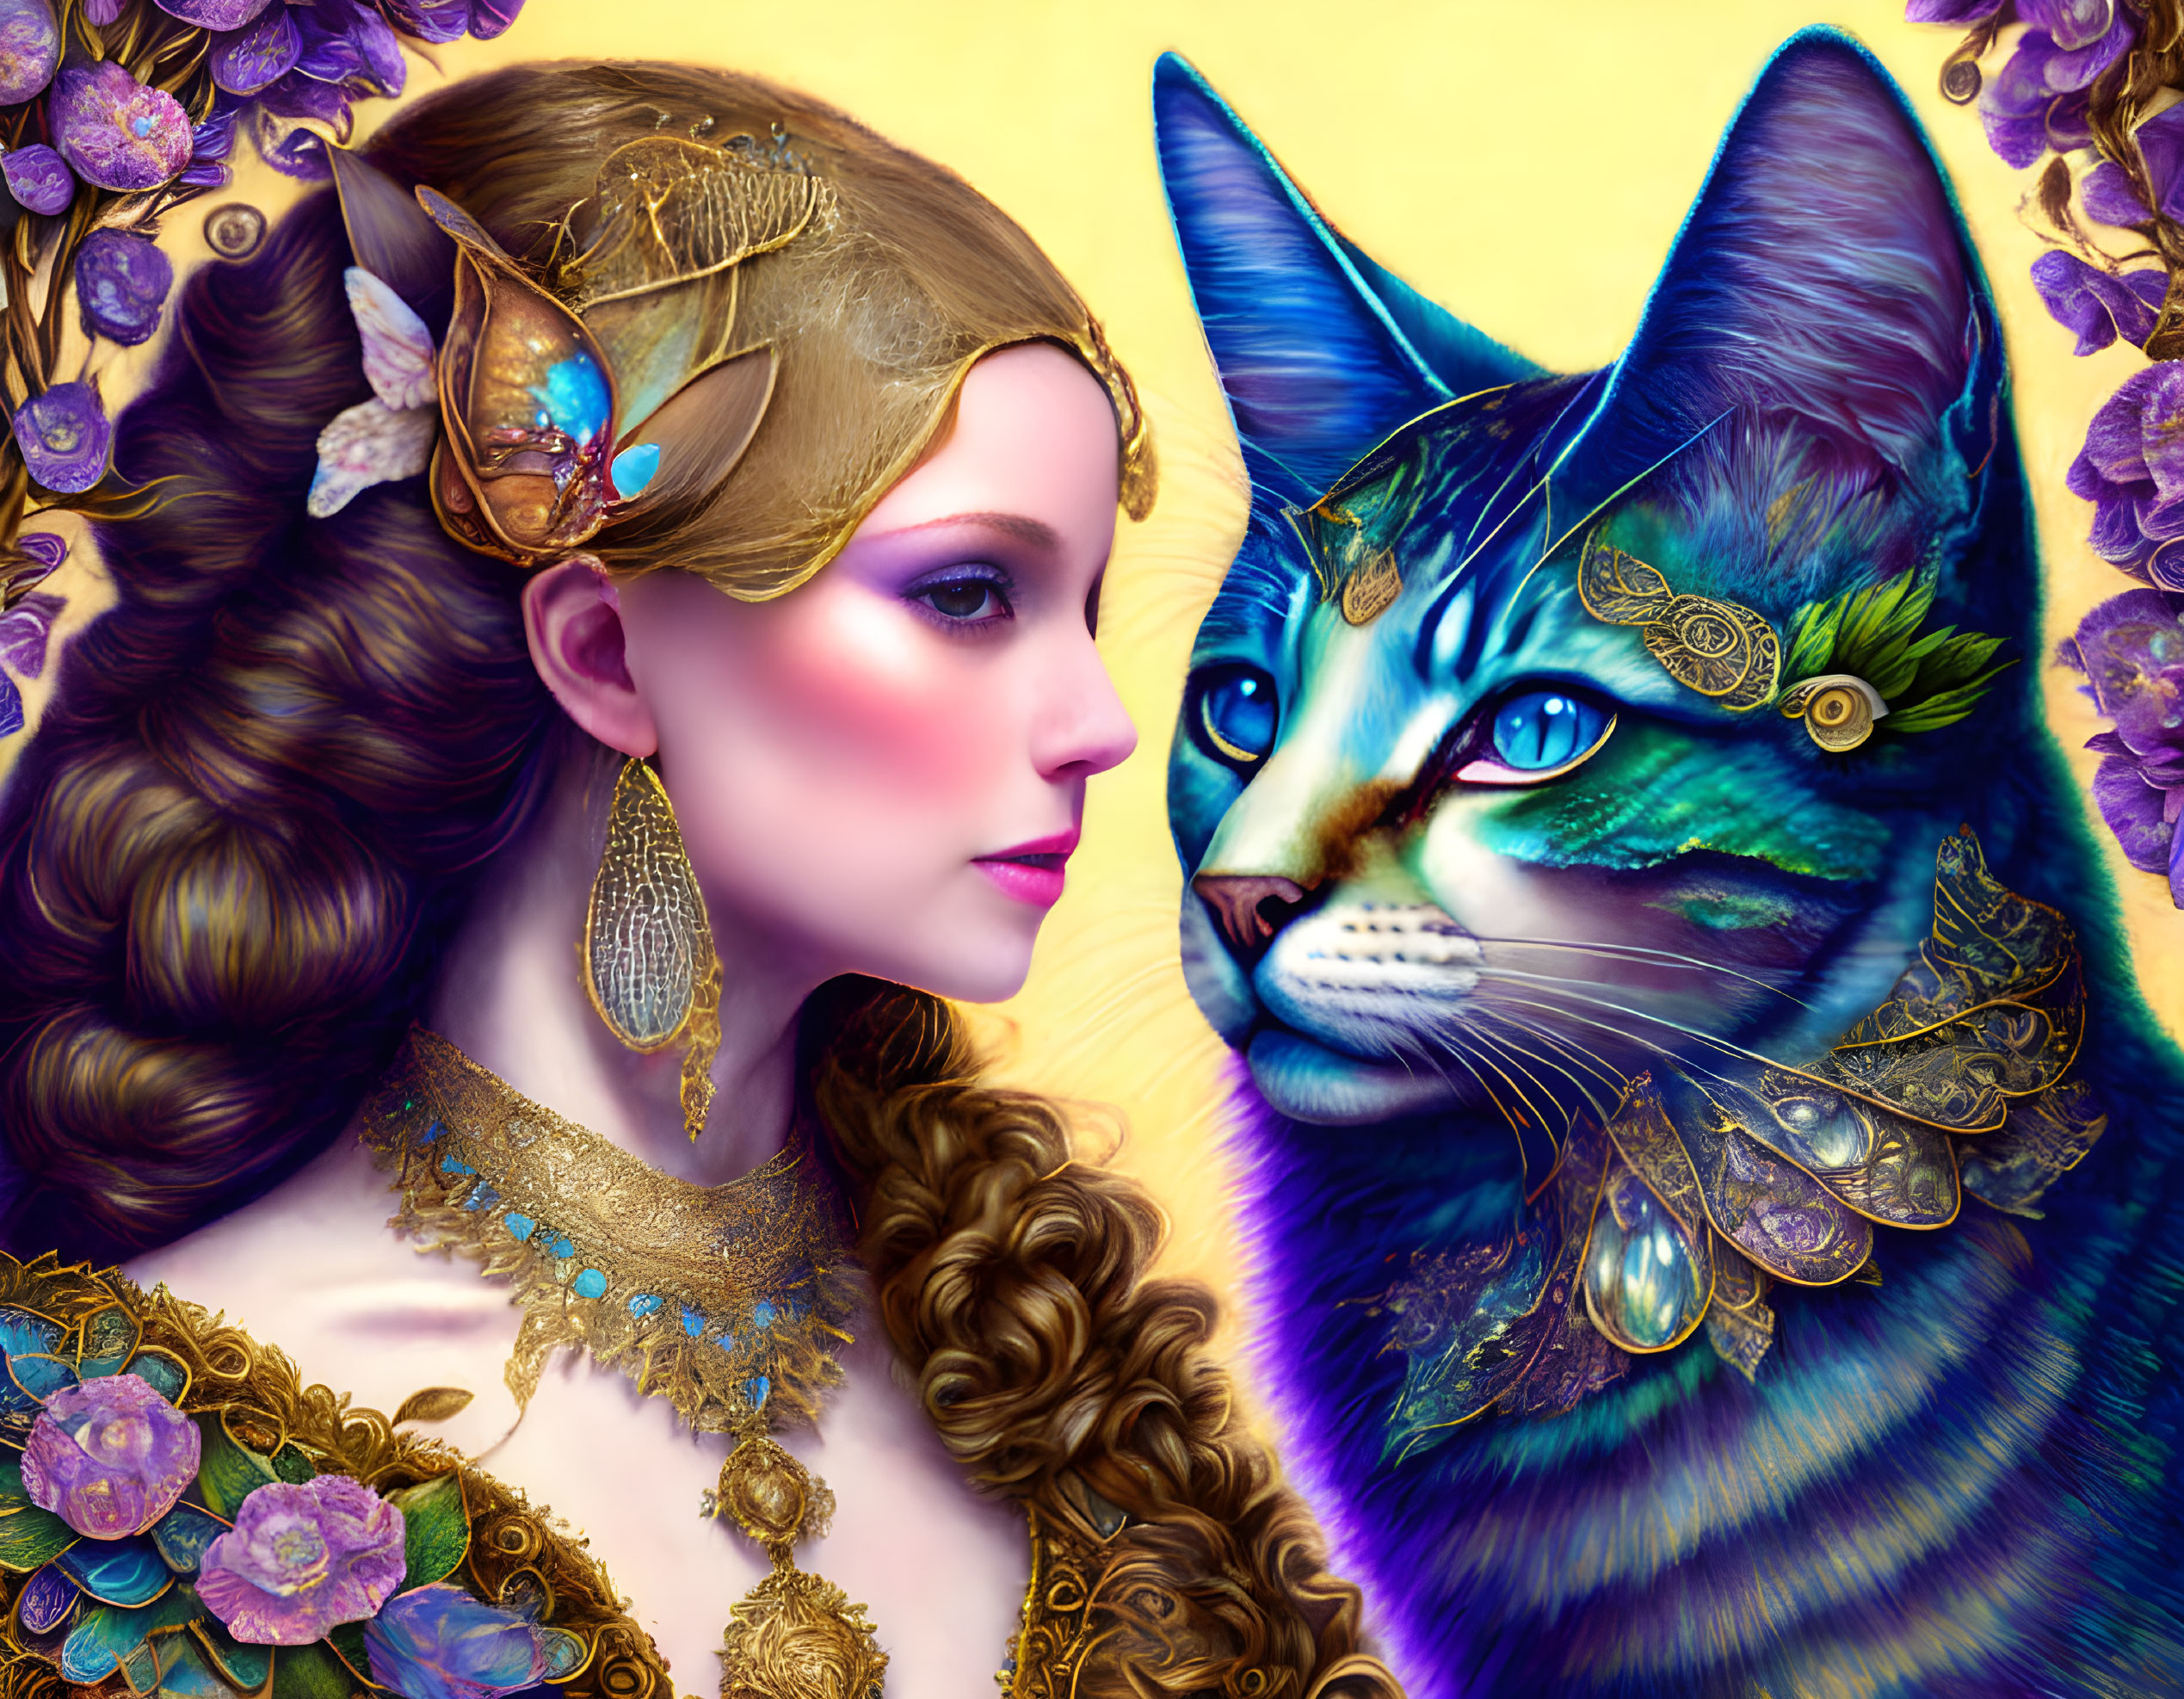 The Fairy Queen meets the King of Cats